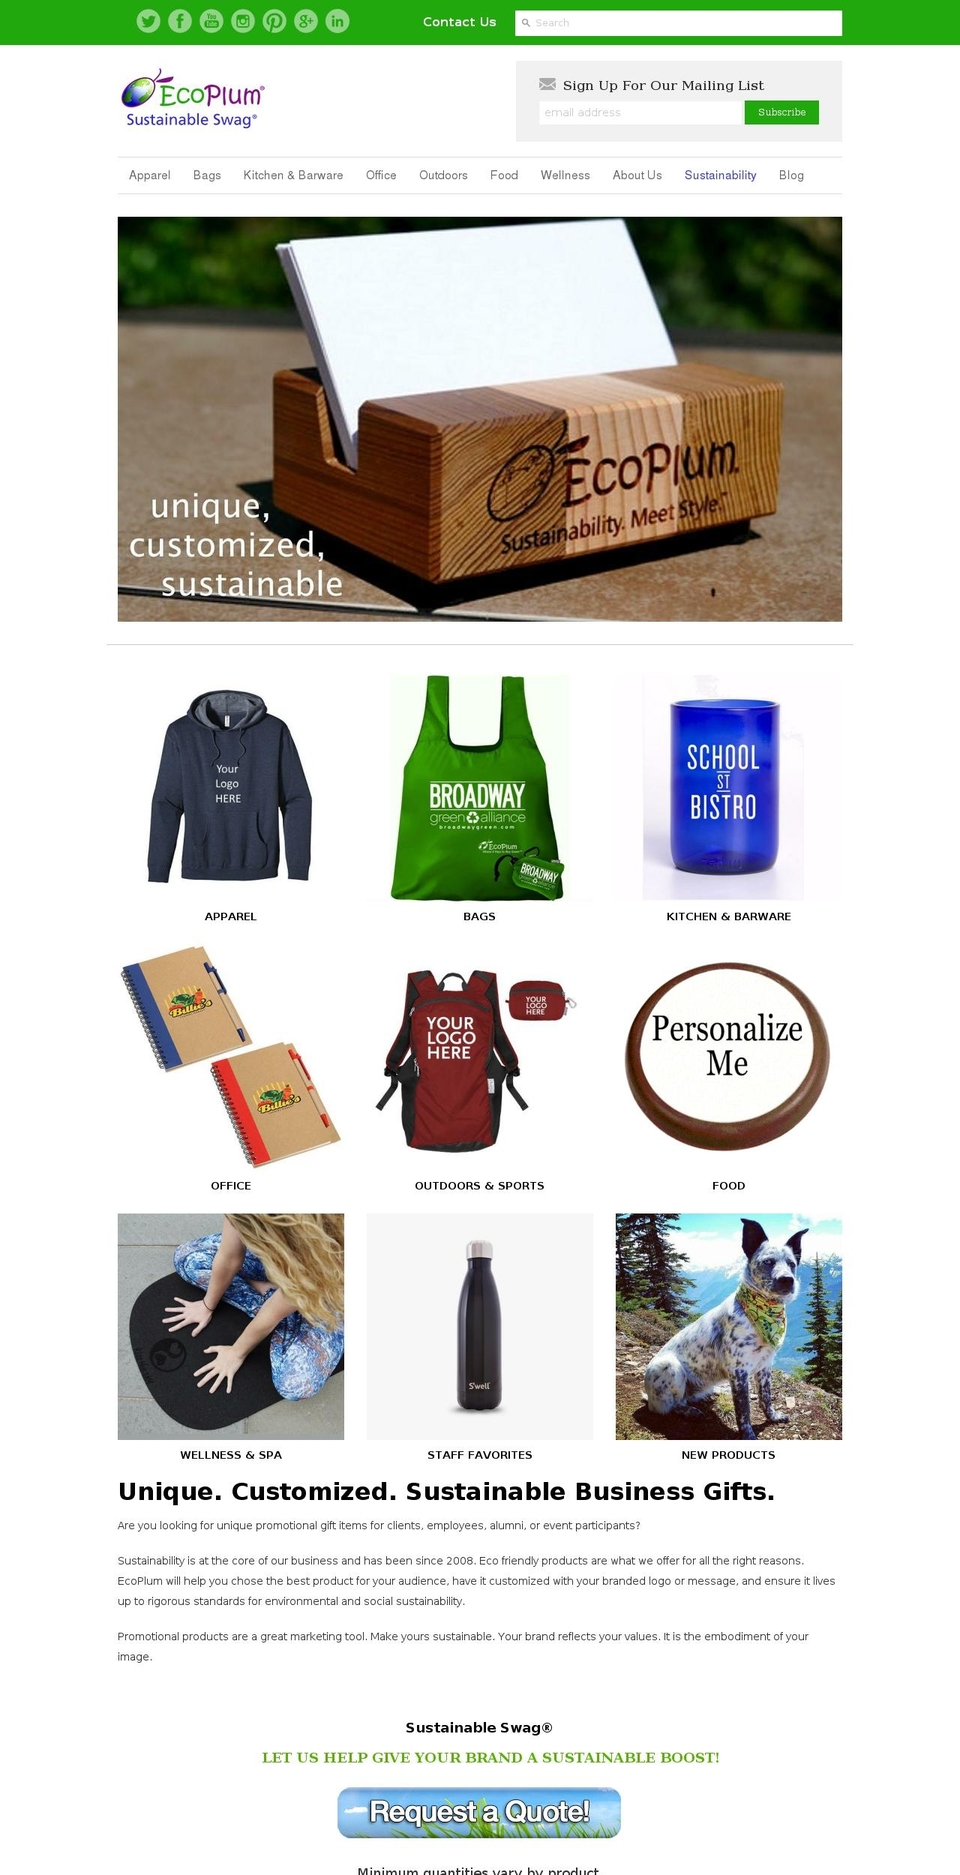 DUPLICATE OF LIVE (usman javed) Shopify theme site example ecoplumbusinessgifts.com